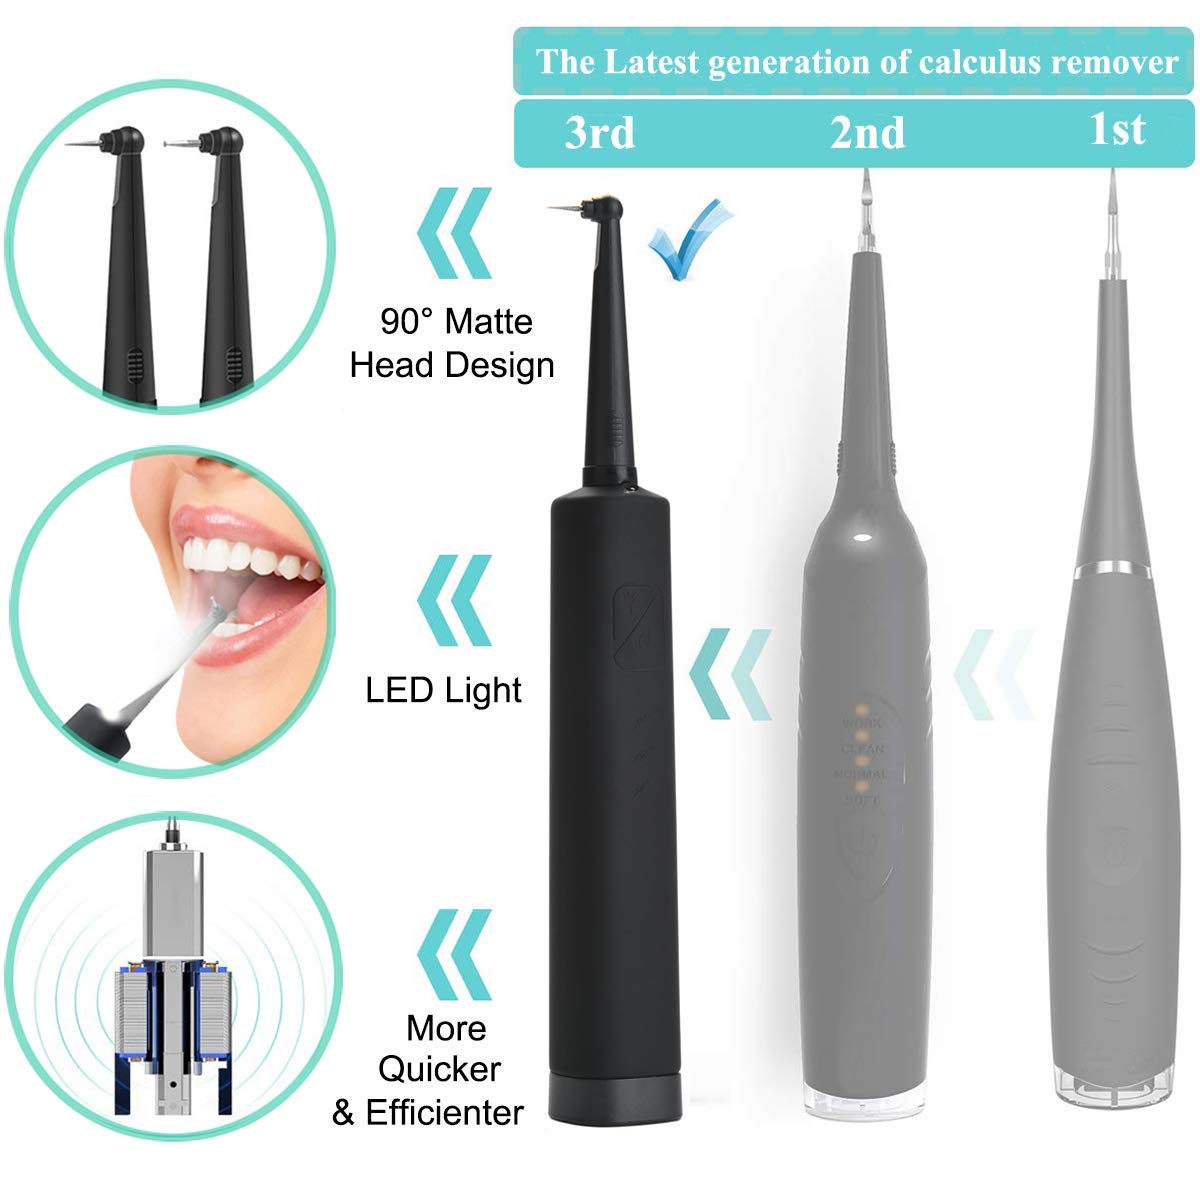 Tooth Calculus Remover Electric Sonic Dental Scaler dental tartar cleaner Cleaning Tooth Stains Tartar tool tooth whiten machin